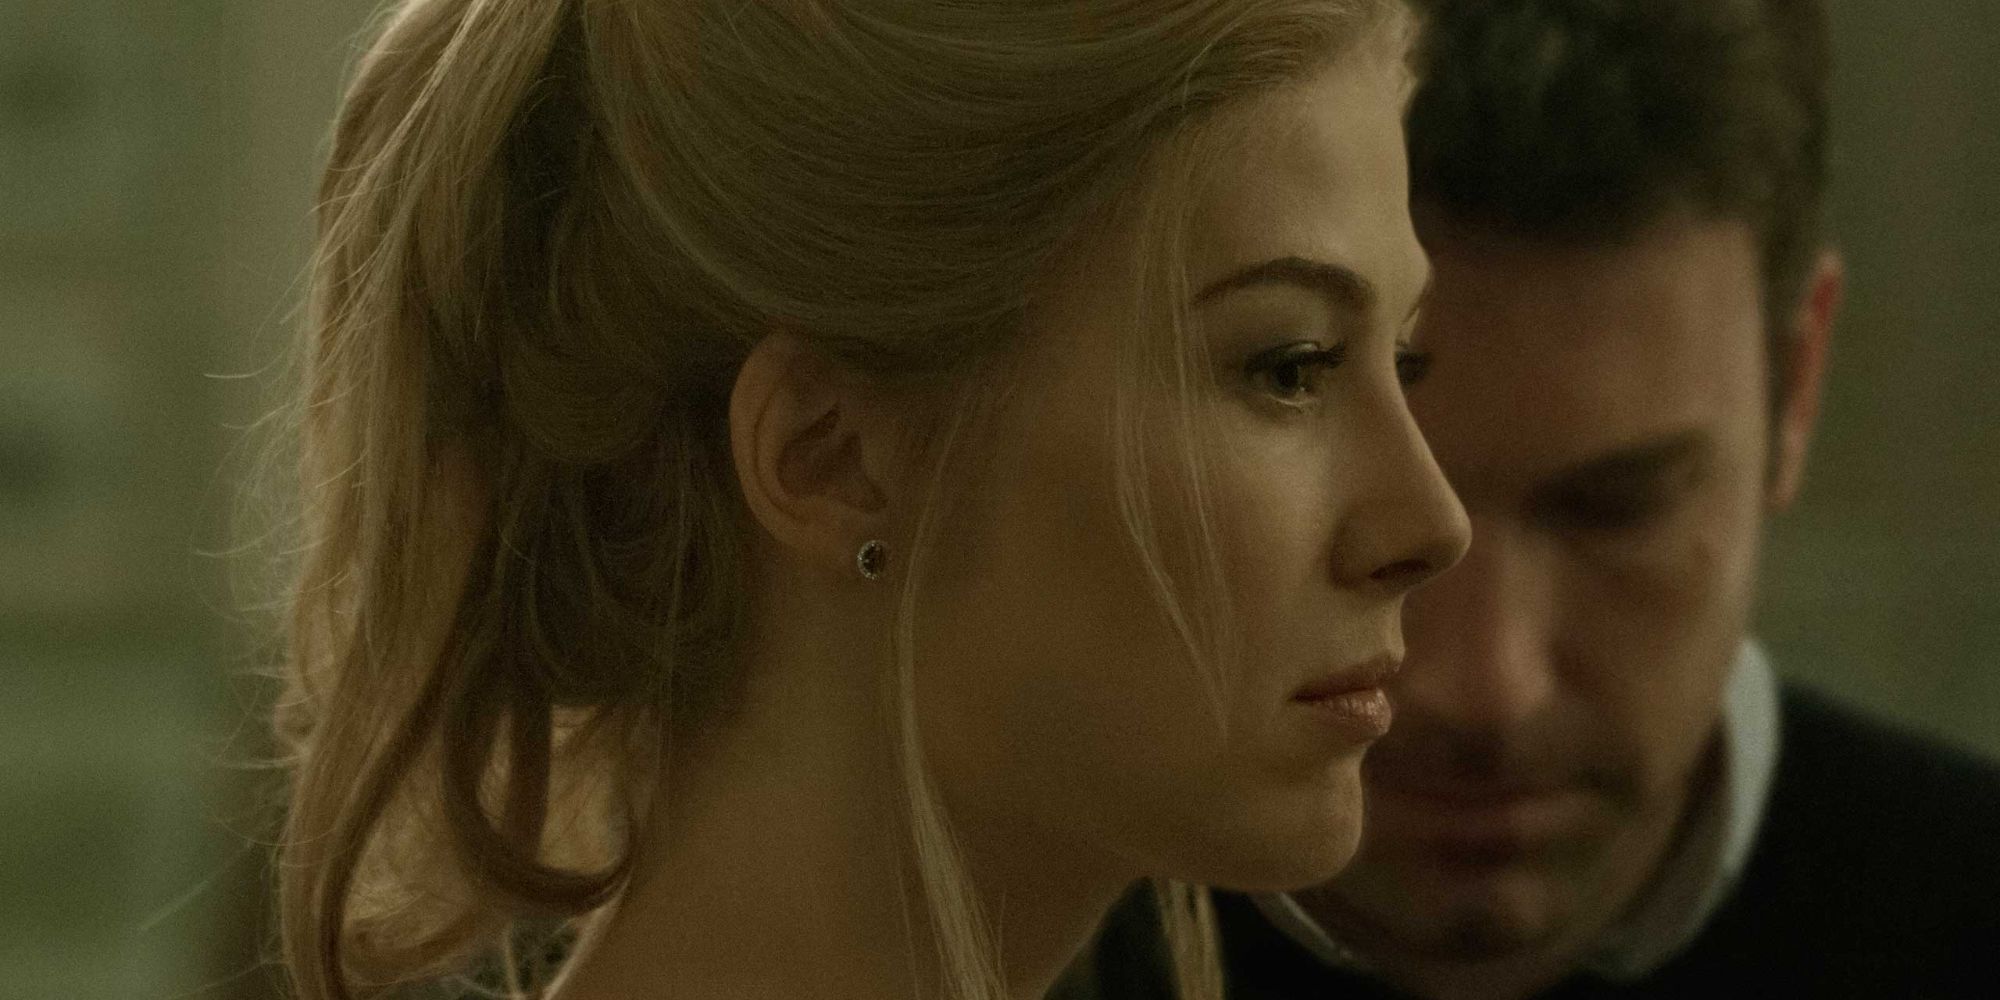 Rosamund Pike stares off with Ben Affleck in the background